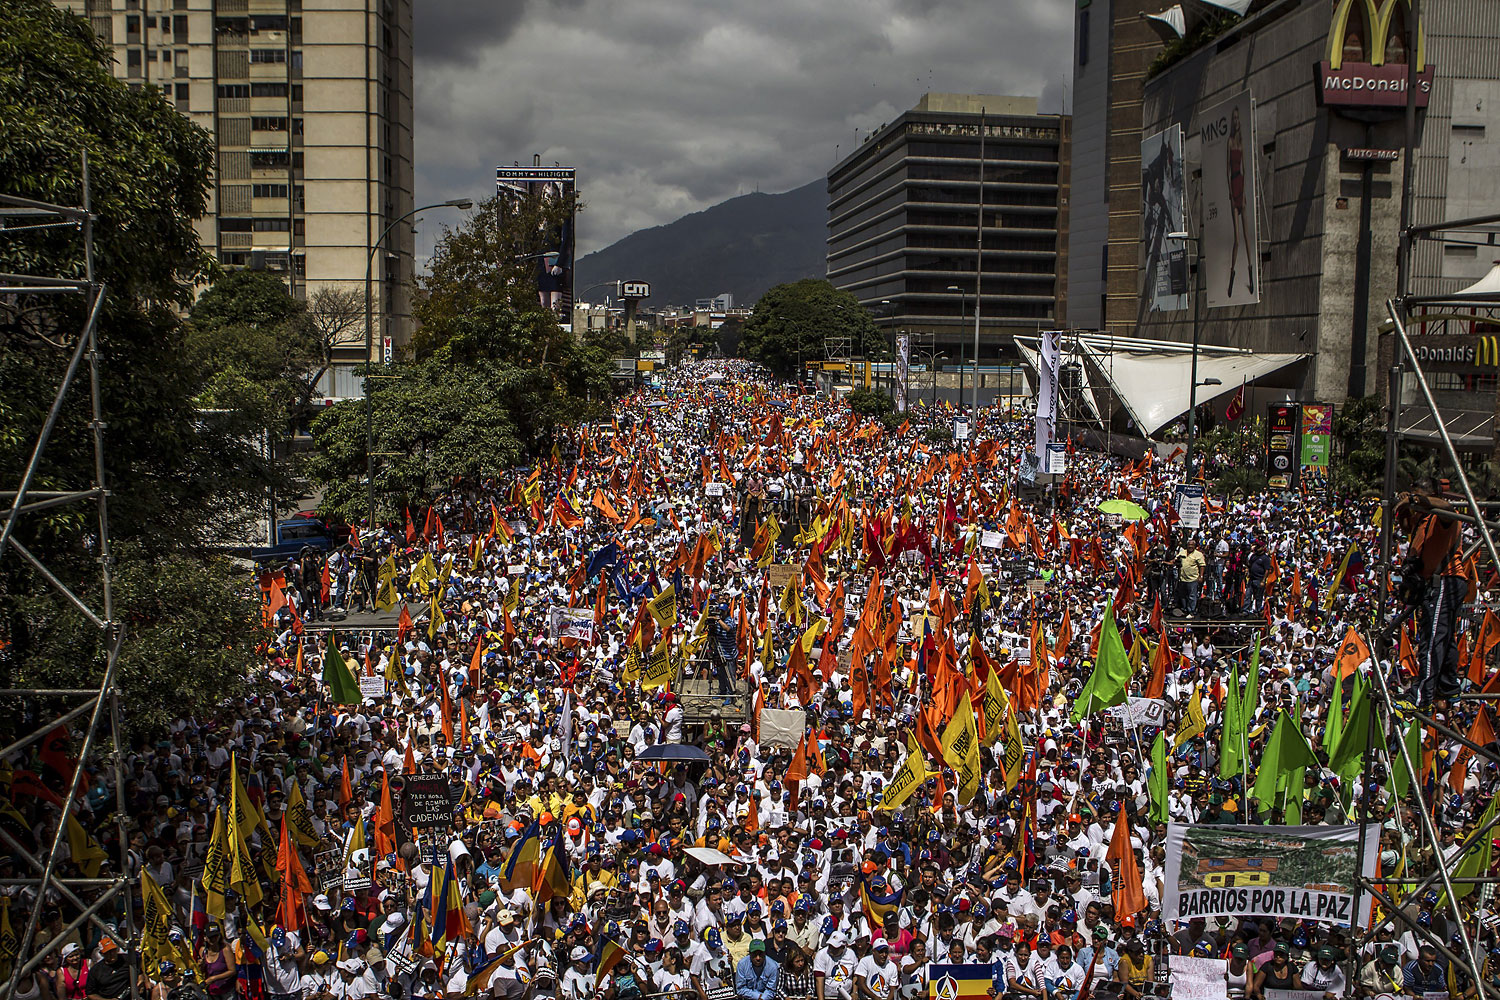 Supporters of the Venezuelan opposition rally on a street in Caracas, Feb. 22, 2014.